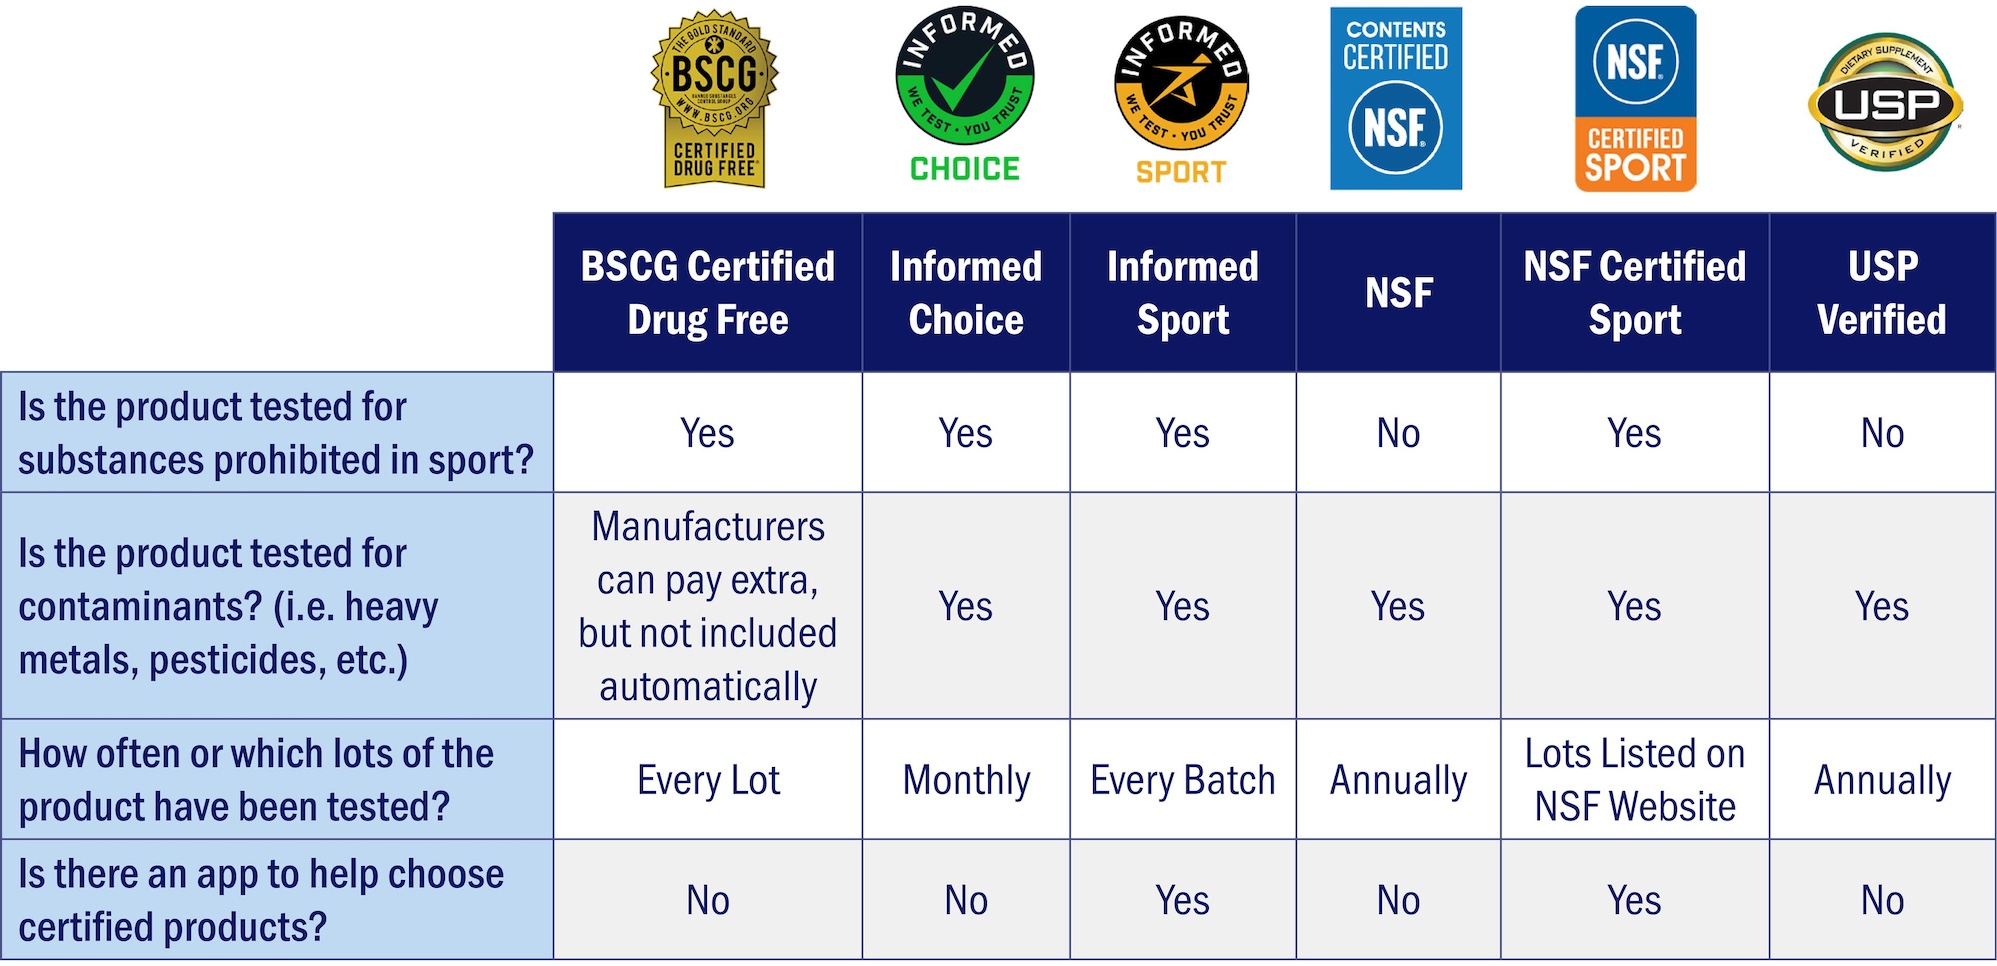 Do they test for substances prohibited in sport? Yes: BSCG Certified Drug Free, Informed Choice, Informed Sport, NSF Certified Sport. No: NSF, USP Verified Do they test for contaminants? Manufacturers can pay extra, but not included automatically: BSCG Certified Drug Free. Yes: NSF, NSF Certified Sport, USP Verified. No: Informed Choice, Informed Sport How often do they test a product? BSCG Certified Drug Free: Every Lot, Informed Choice: Monthly, Informed Sport: Every Batch, NSF: Lots listed on NSF website